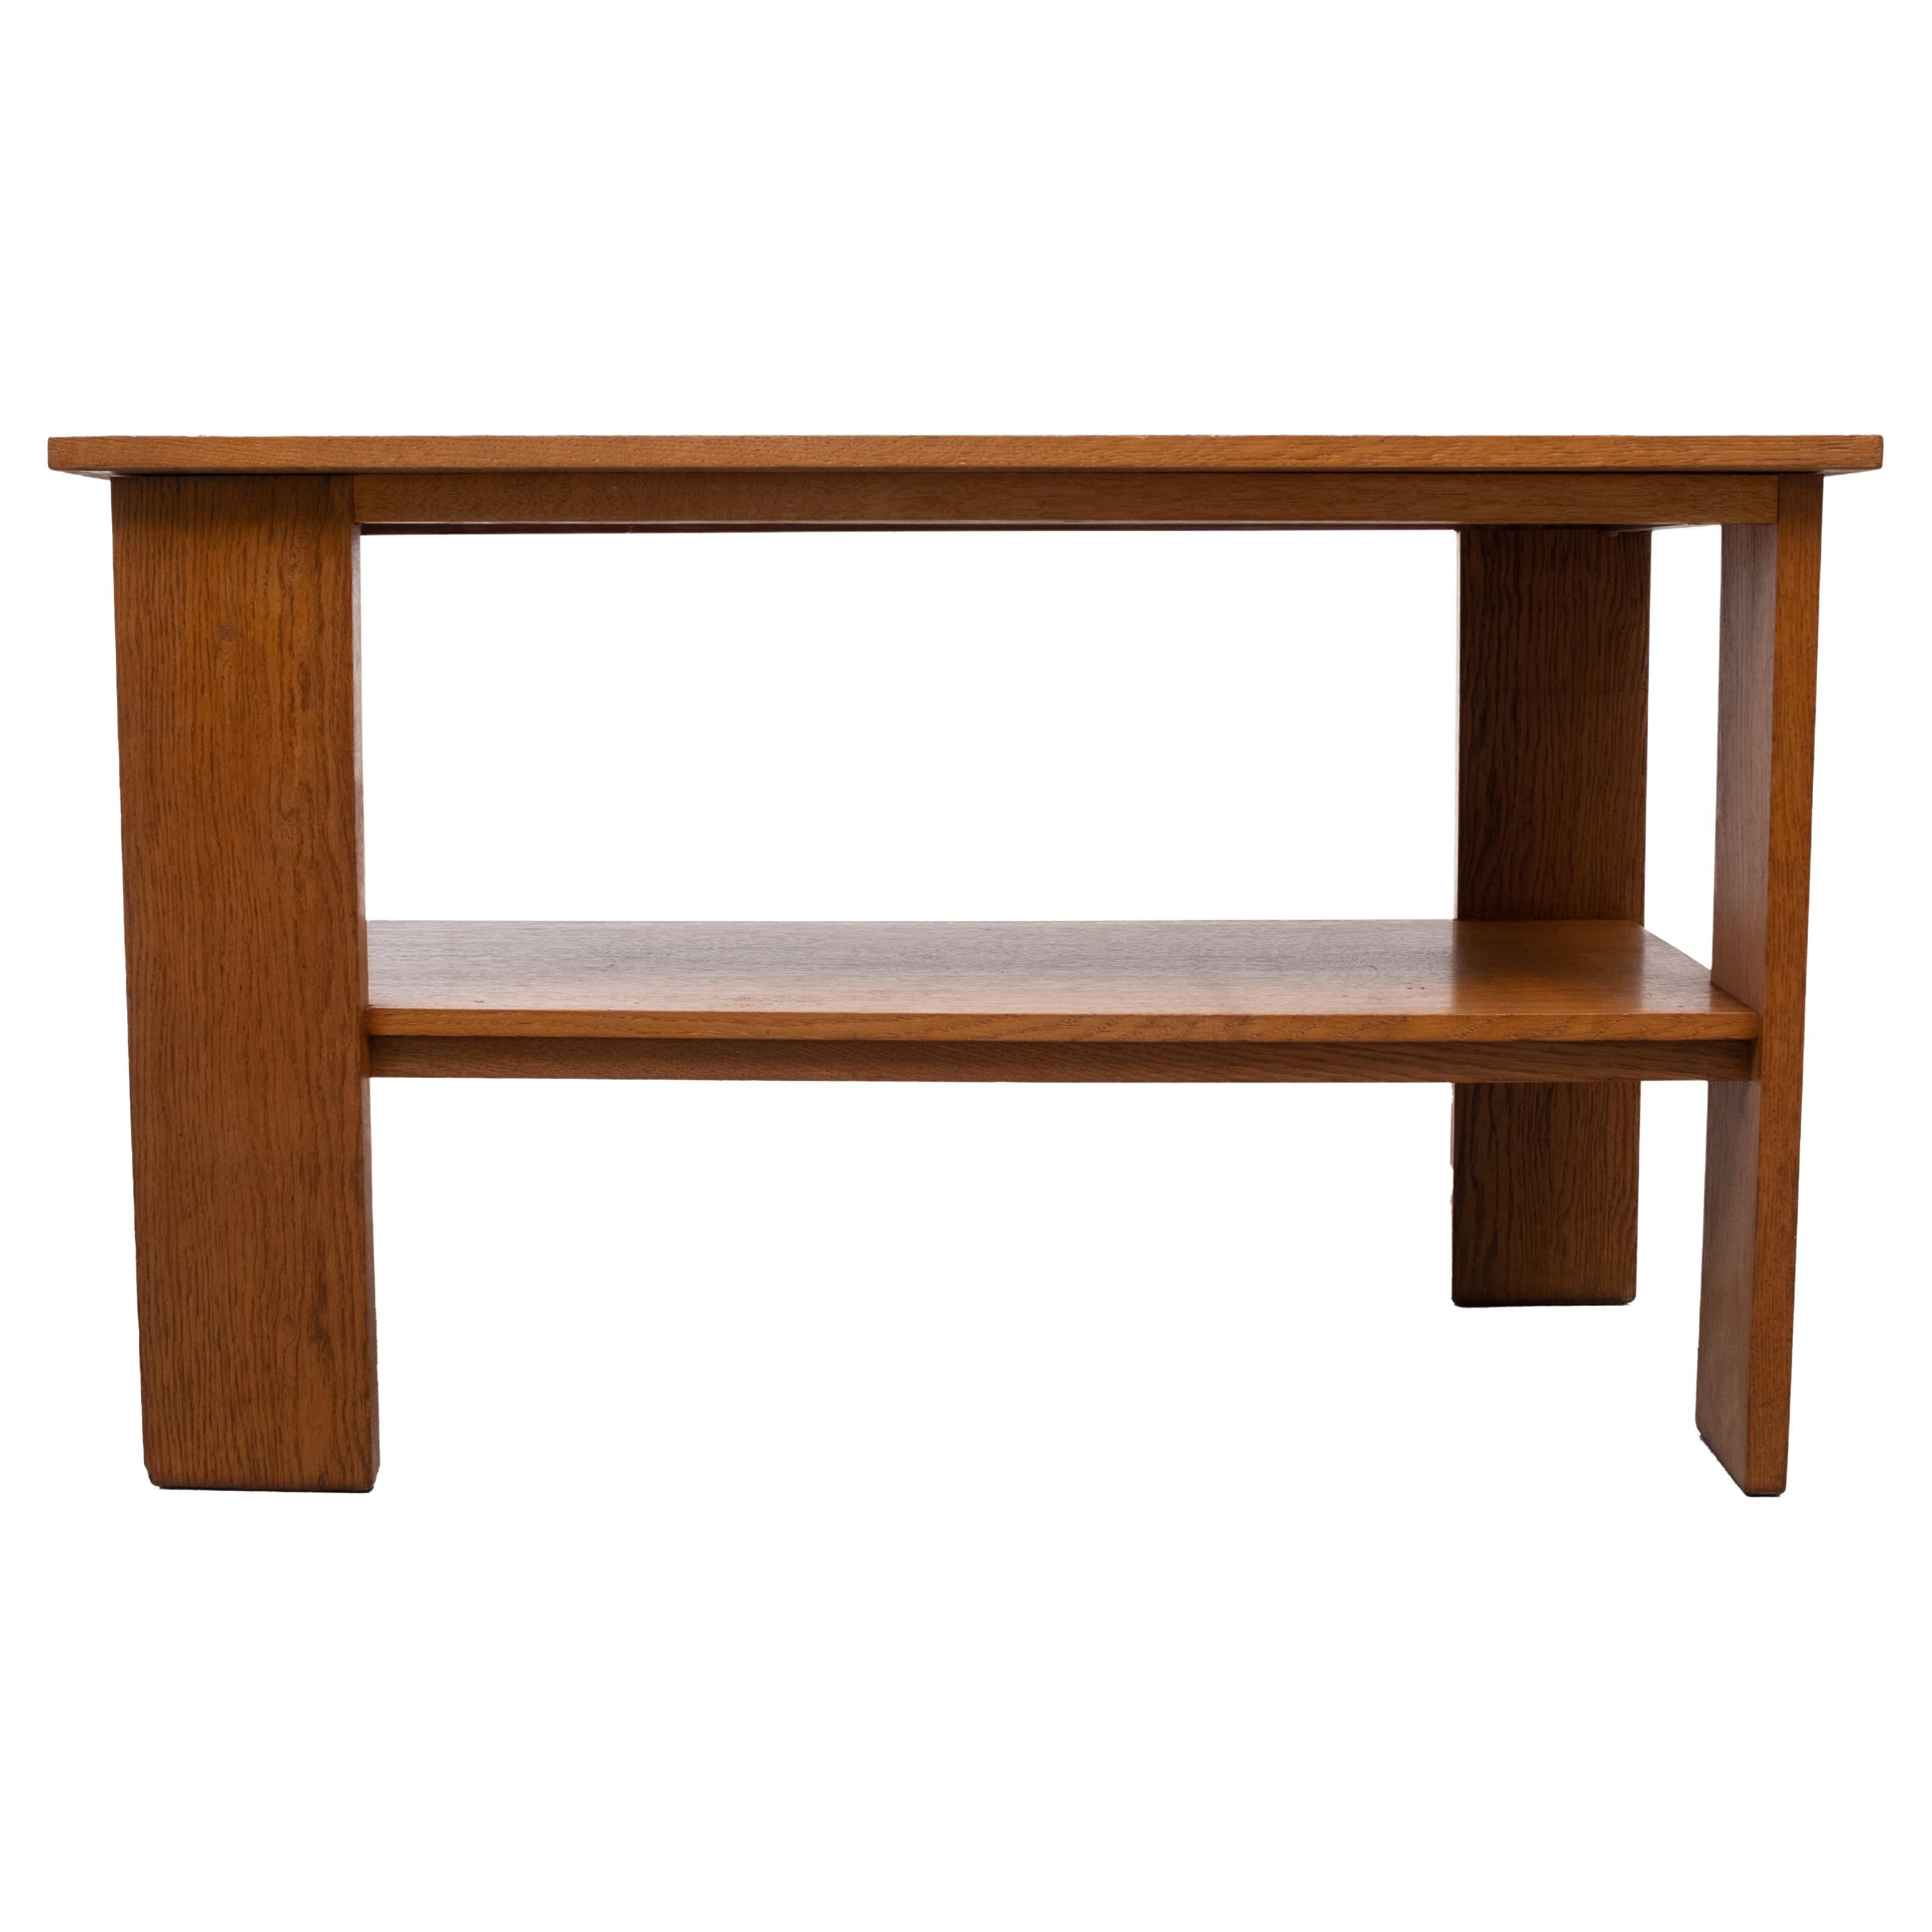 Solid oak side table attributed to Hendrik Wouda 1920/30 The Hague School featured symmetrical and asymmetrical lines, almost no ornamentation, Dutch Art Deco. Still in a very good condition.